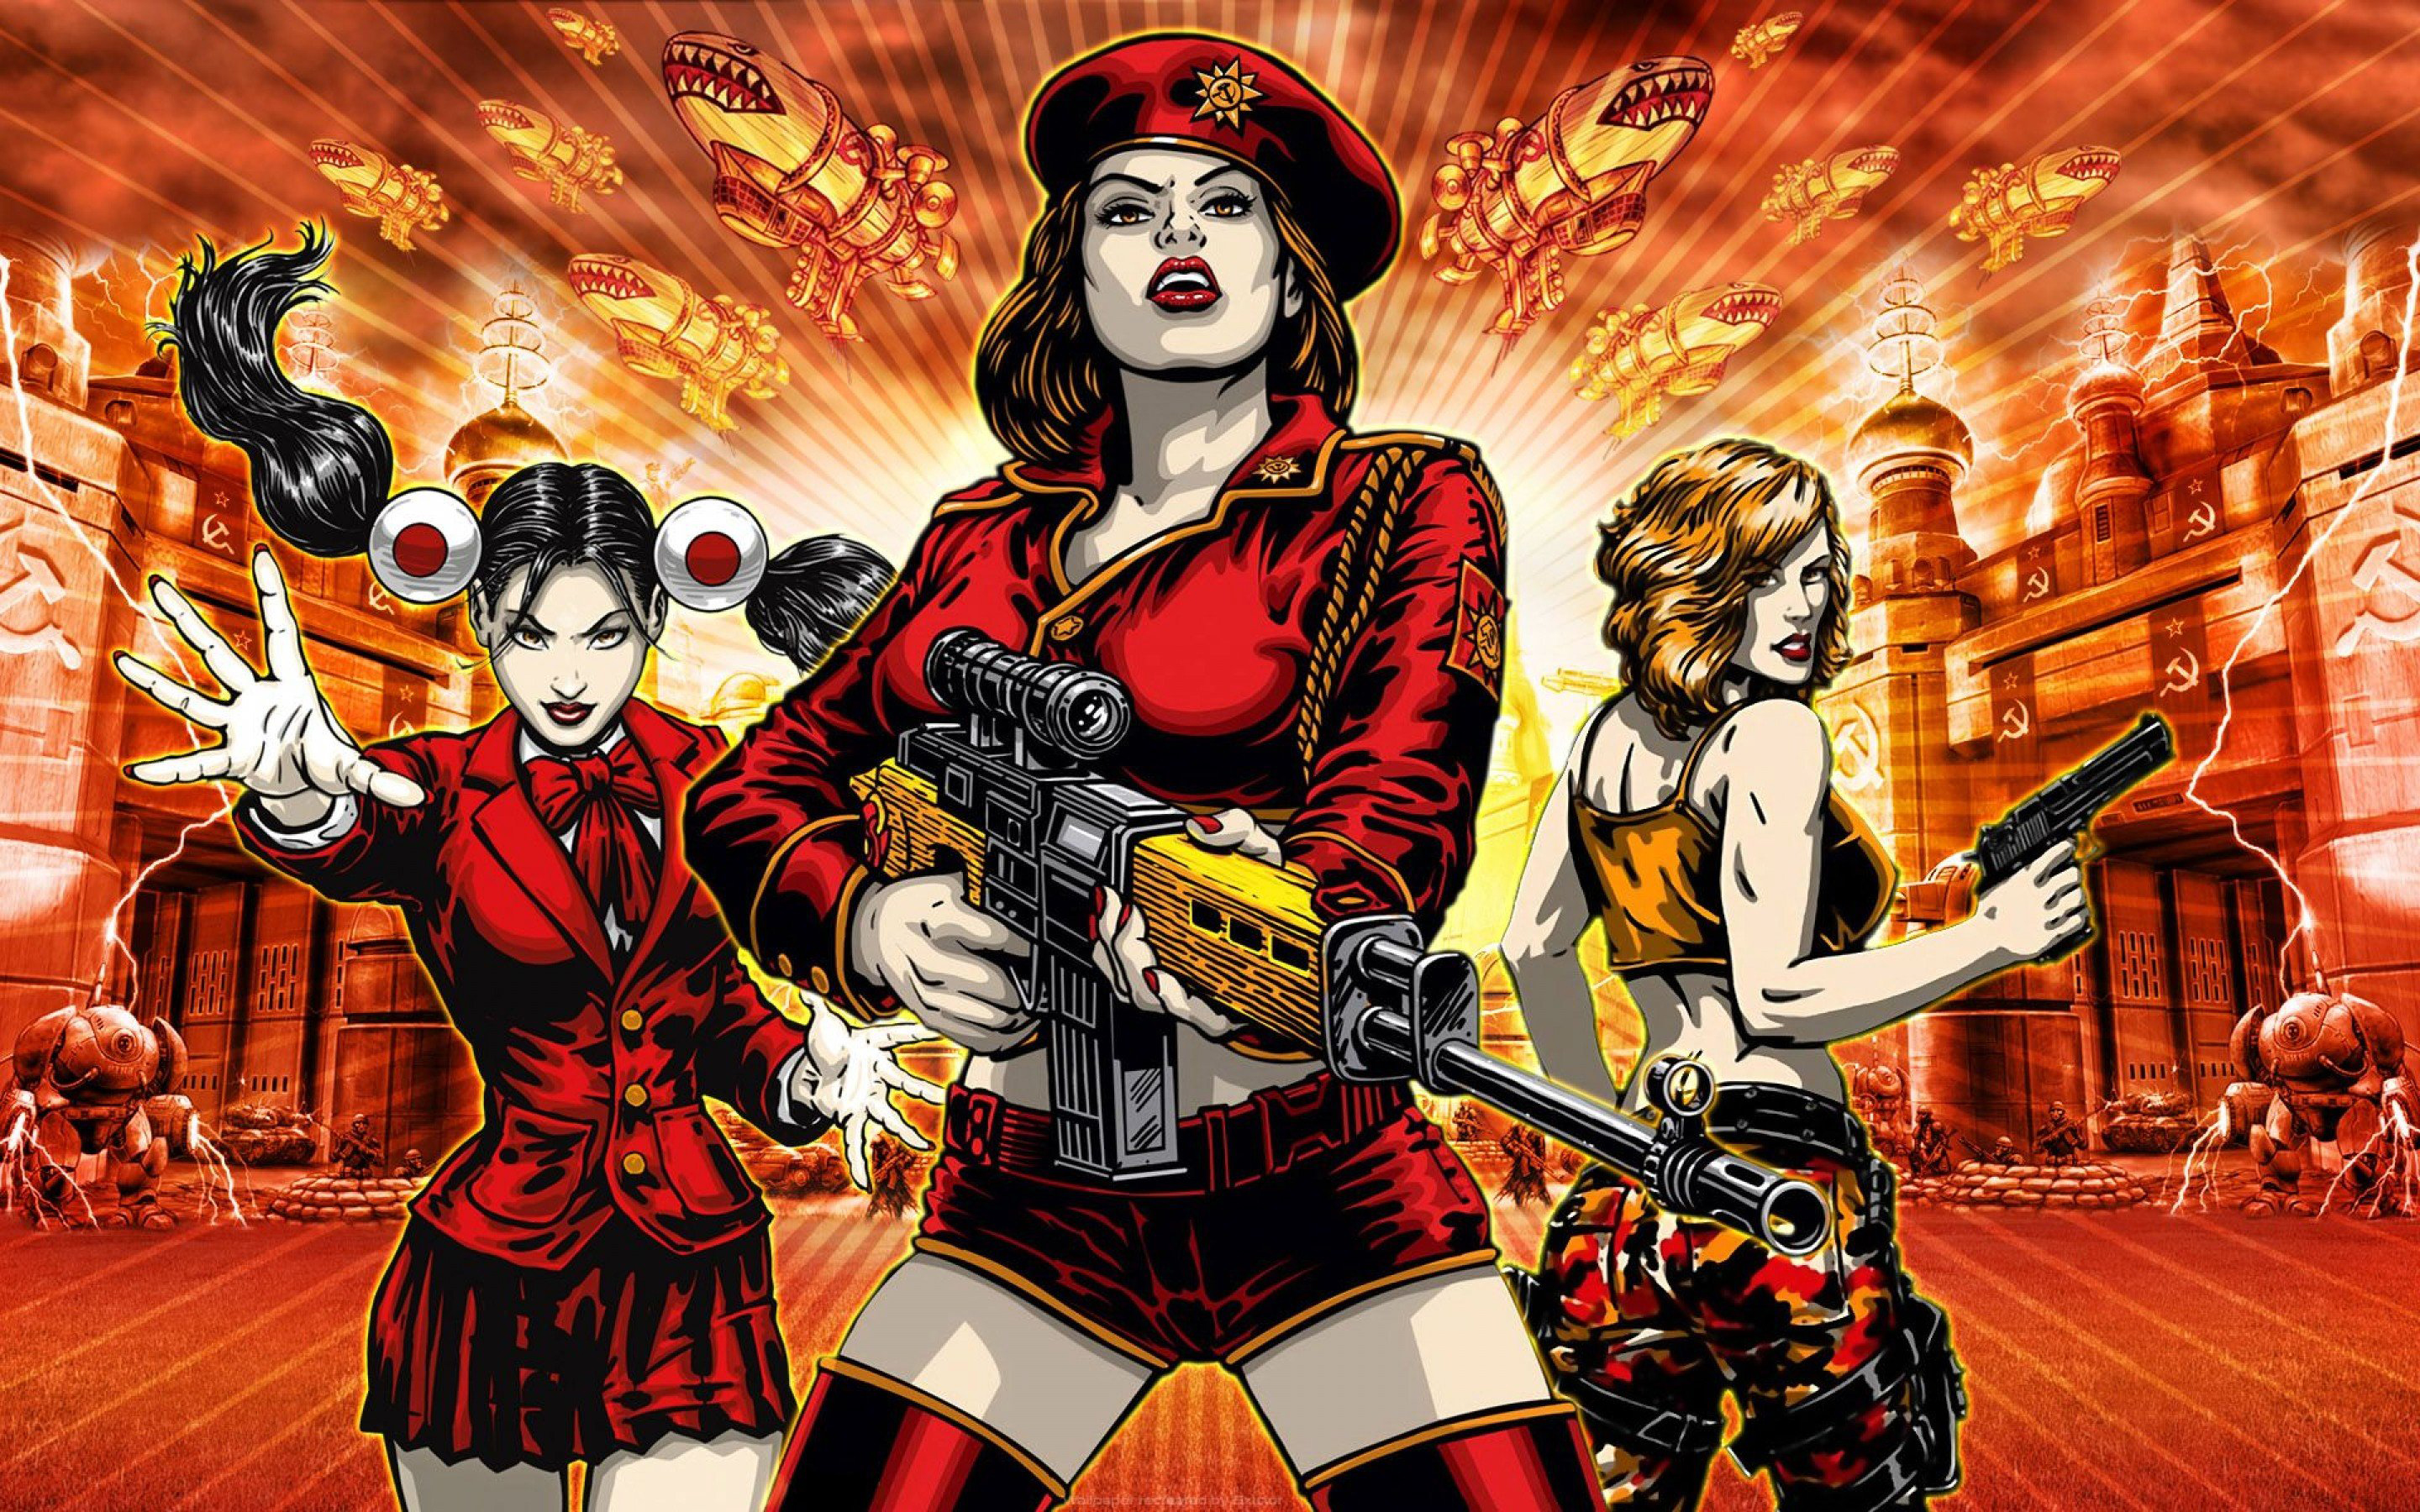 command and conquer red alert 2 installation code